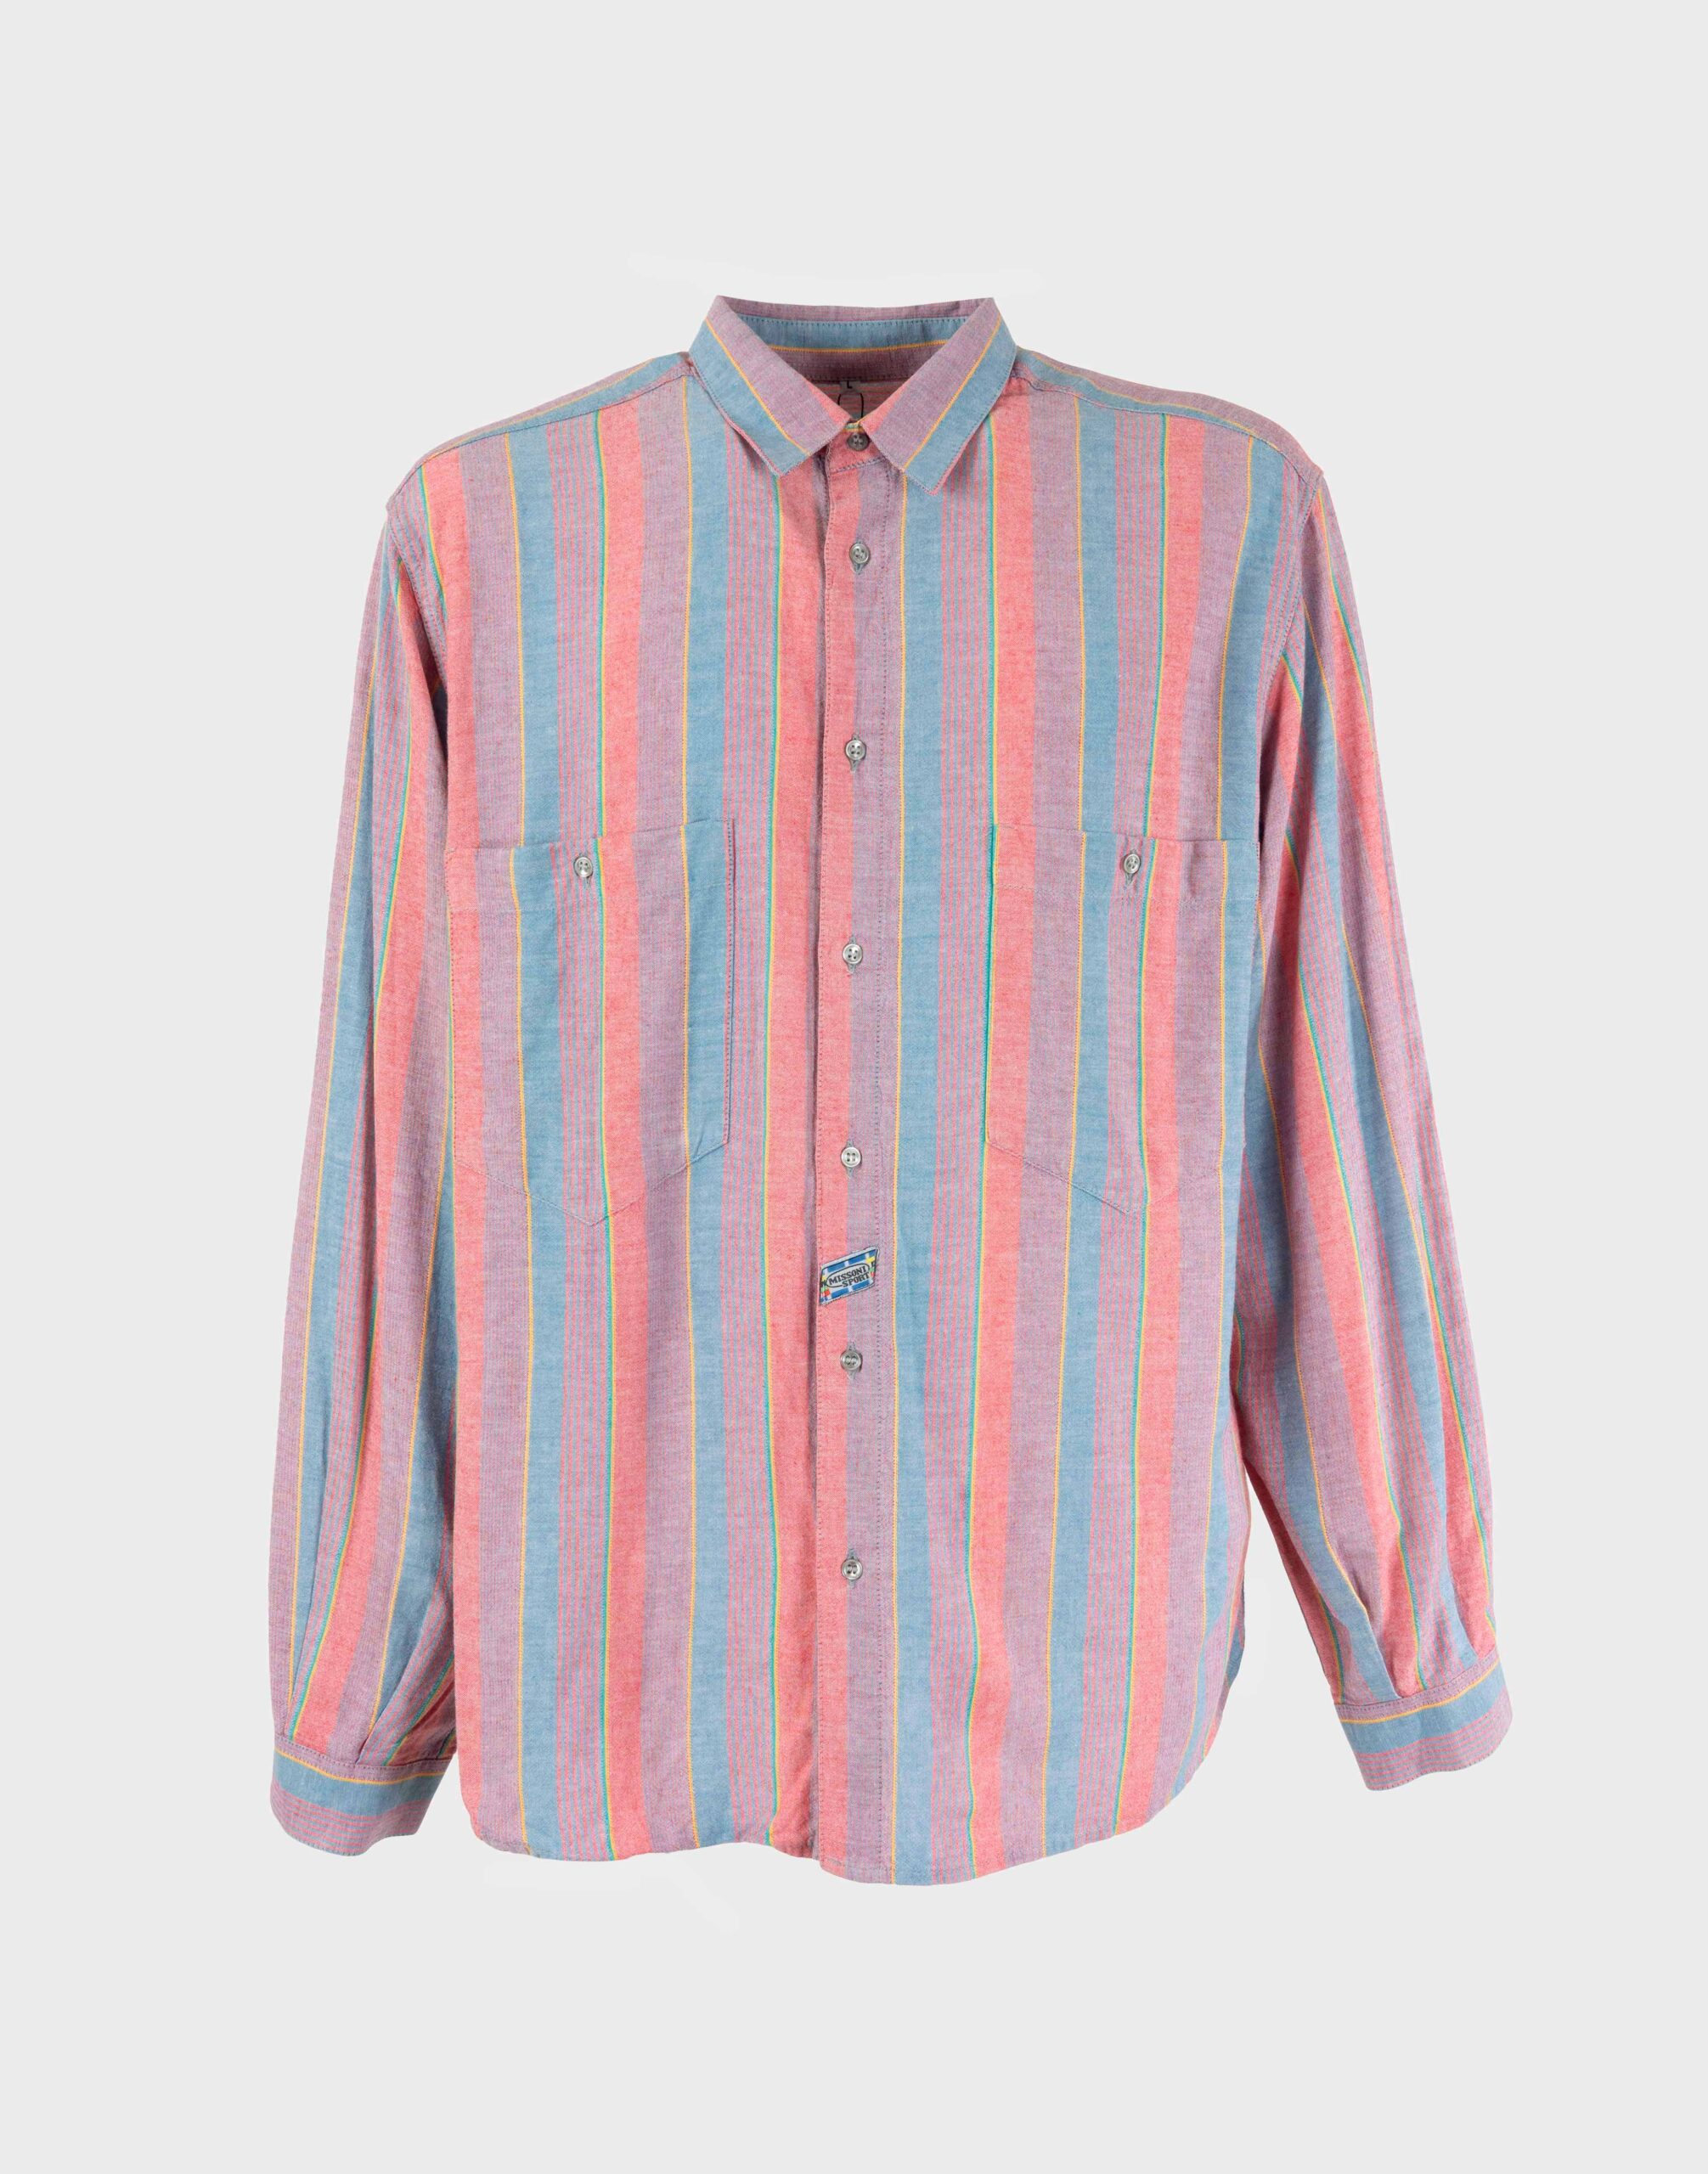 Missoni Sport men's cotton shirt with striped pattern photographed on mannequin with grey background